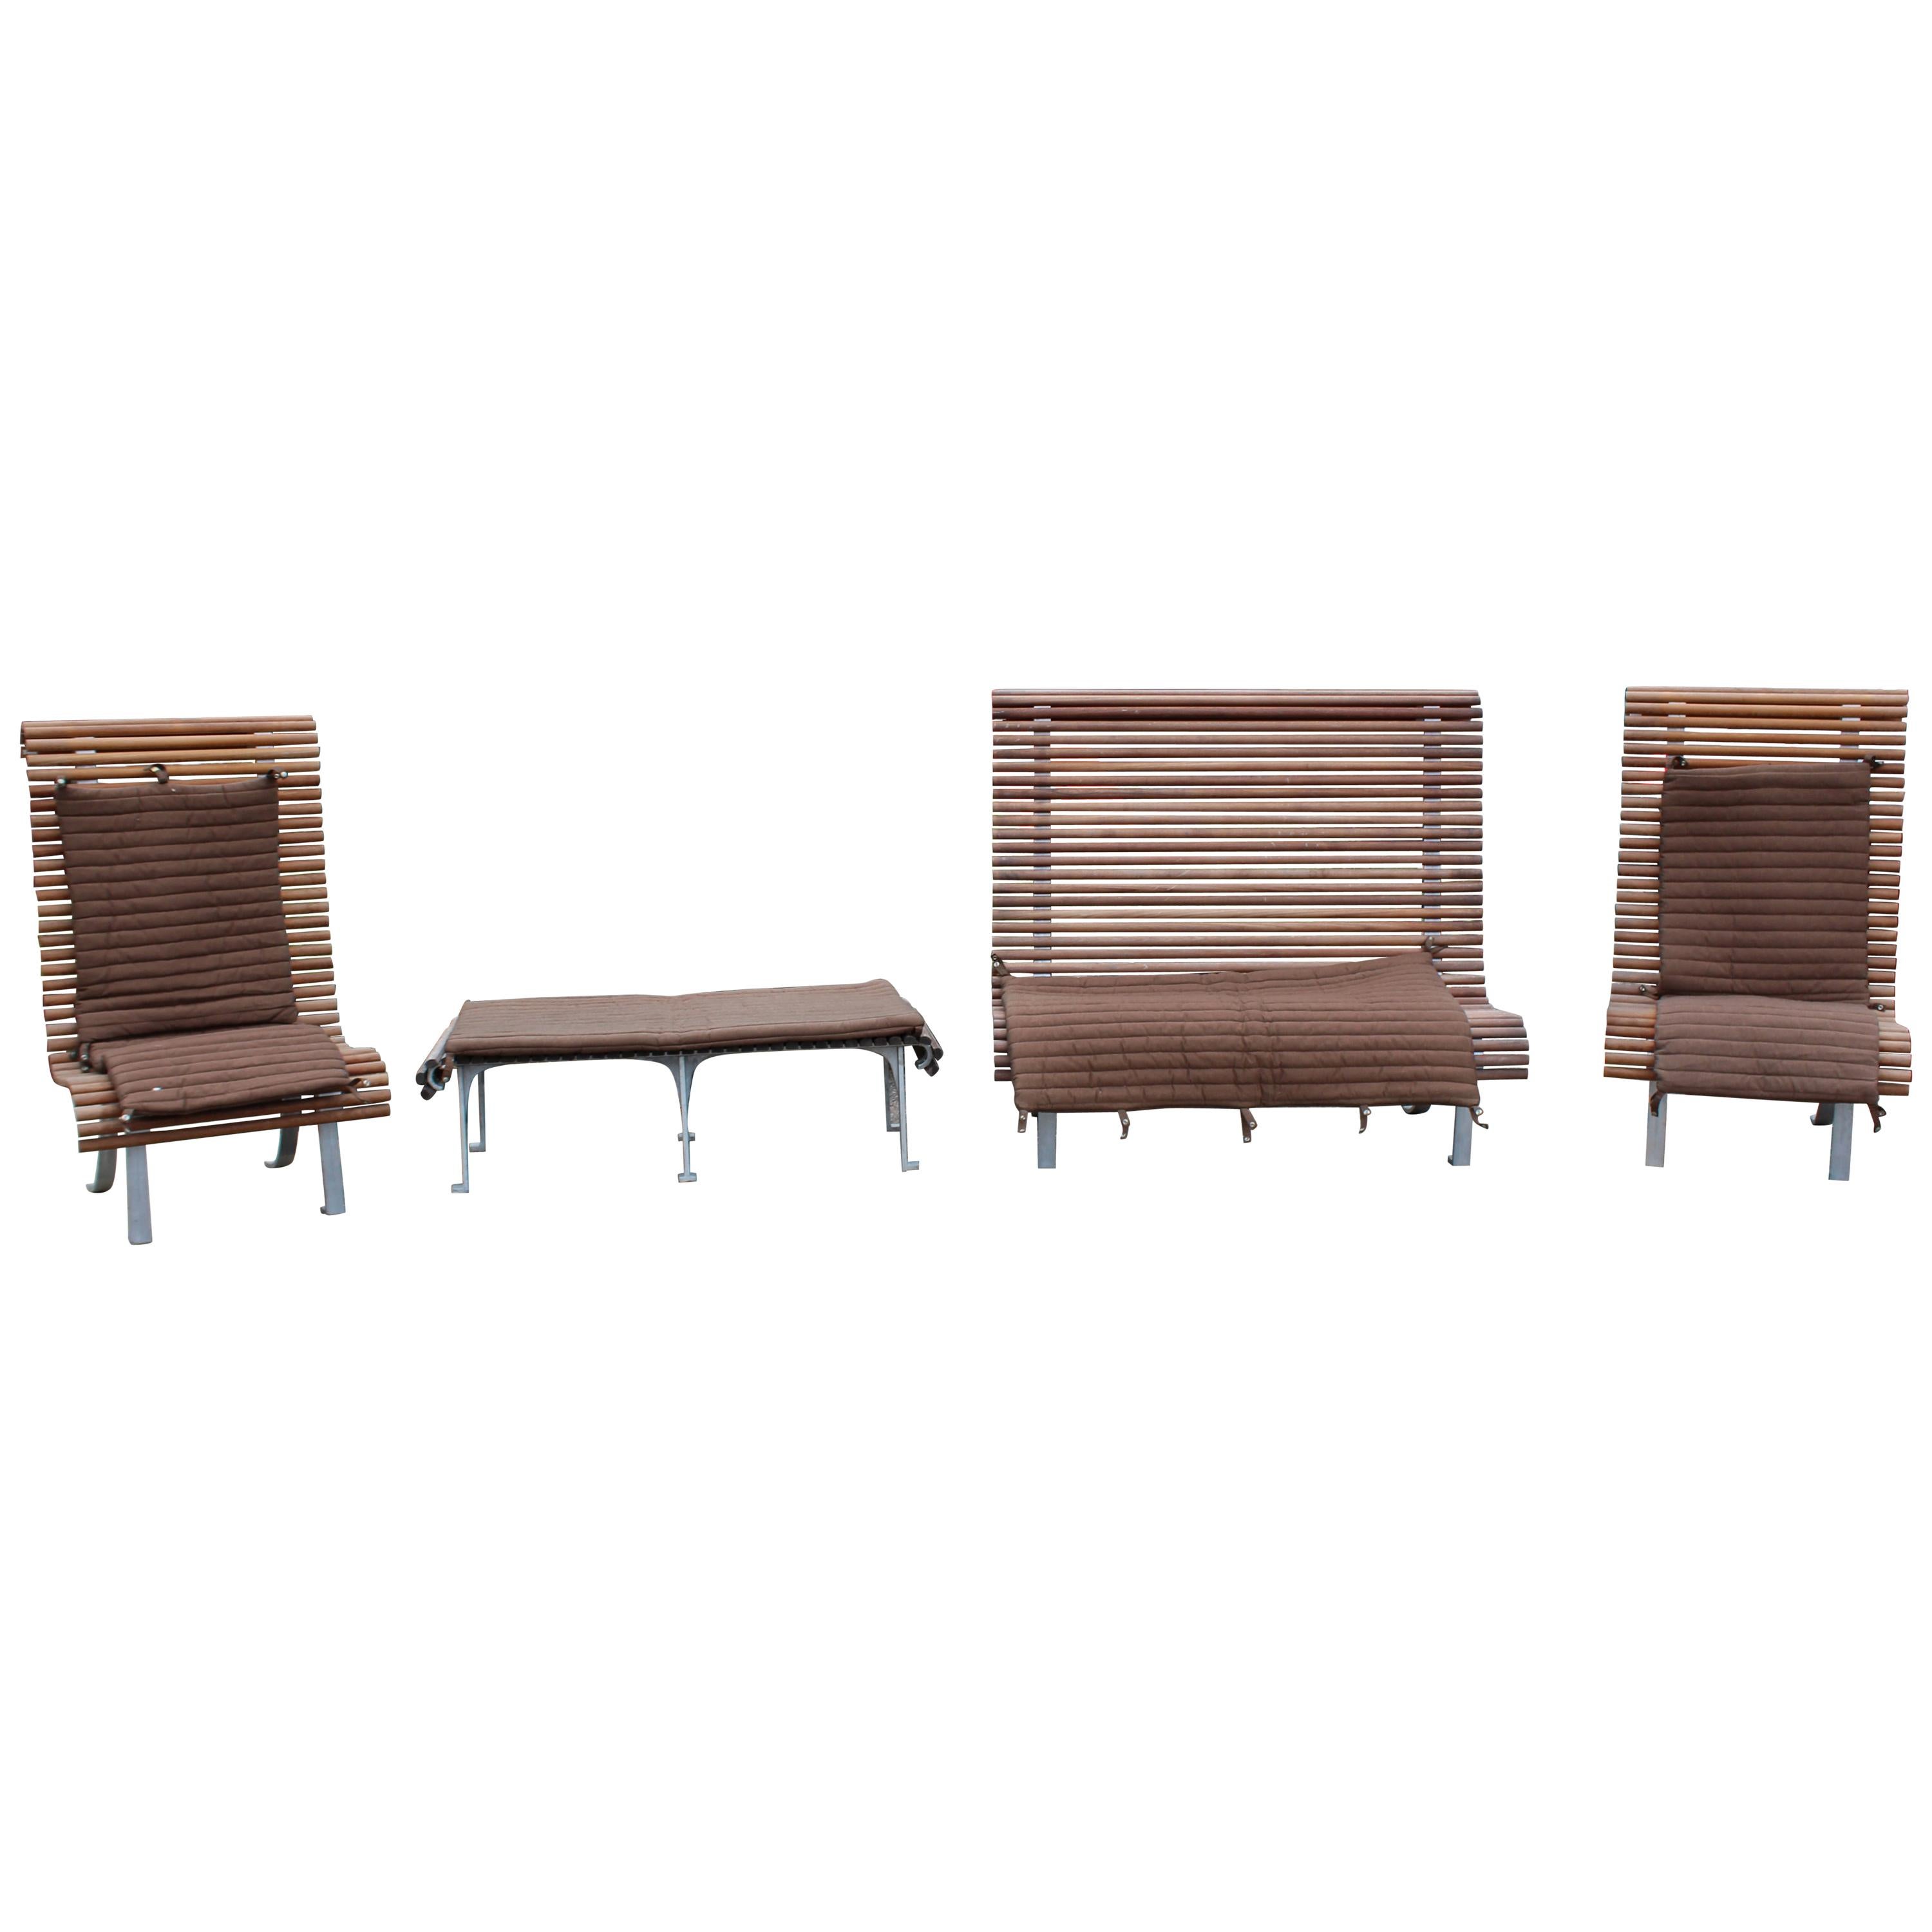 Contemporary Dacheville Nicol France Teak Patio Set Pair Chairs Settee and Bench